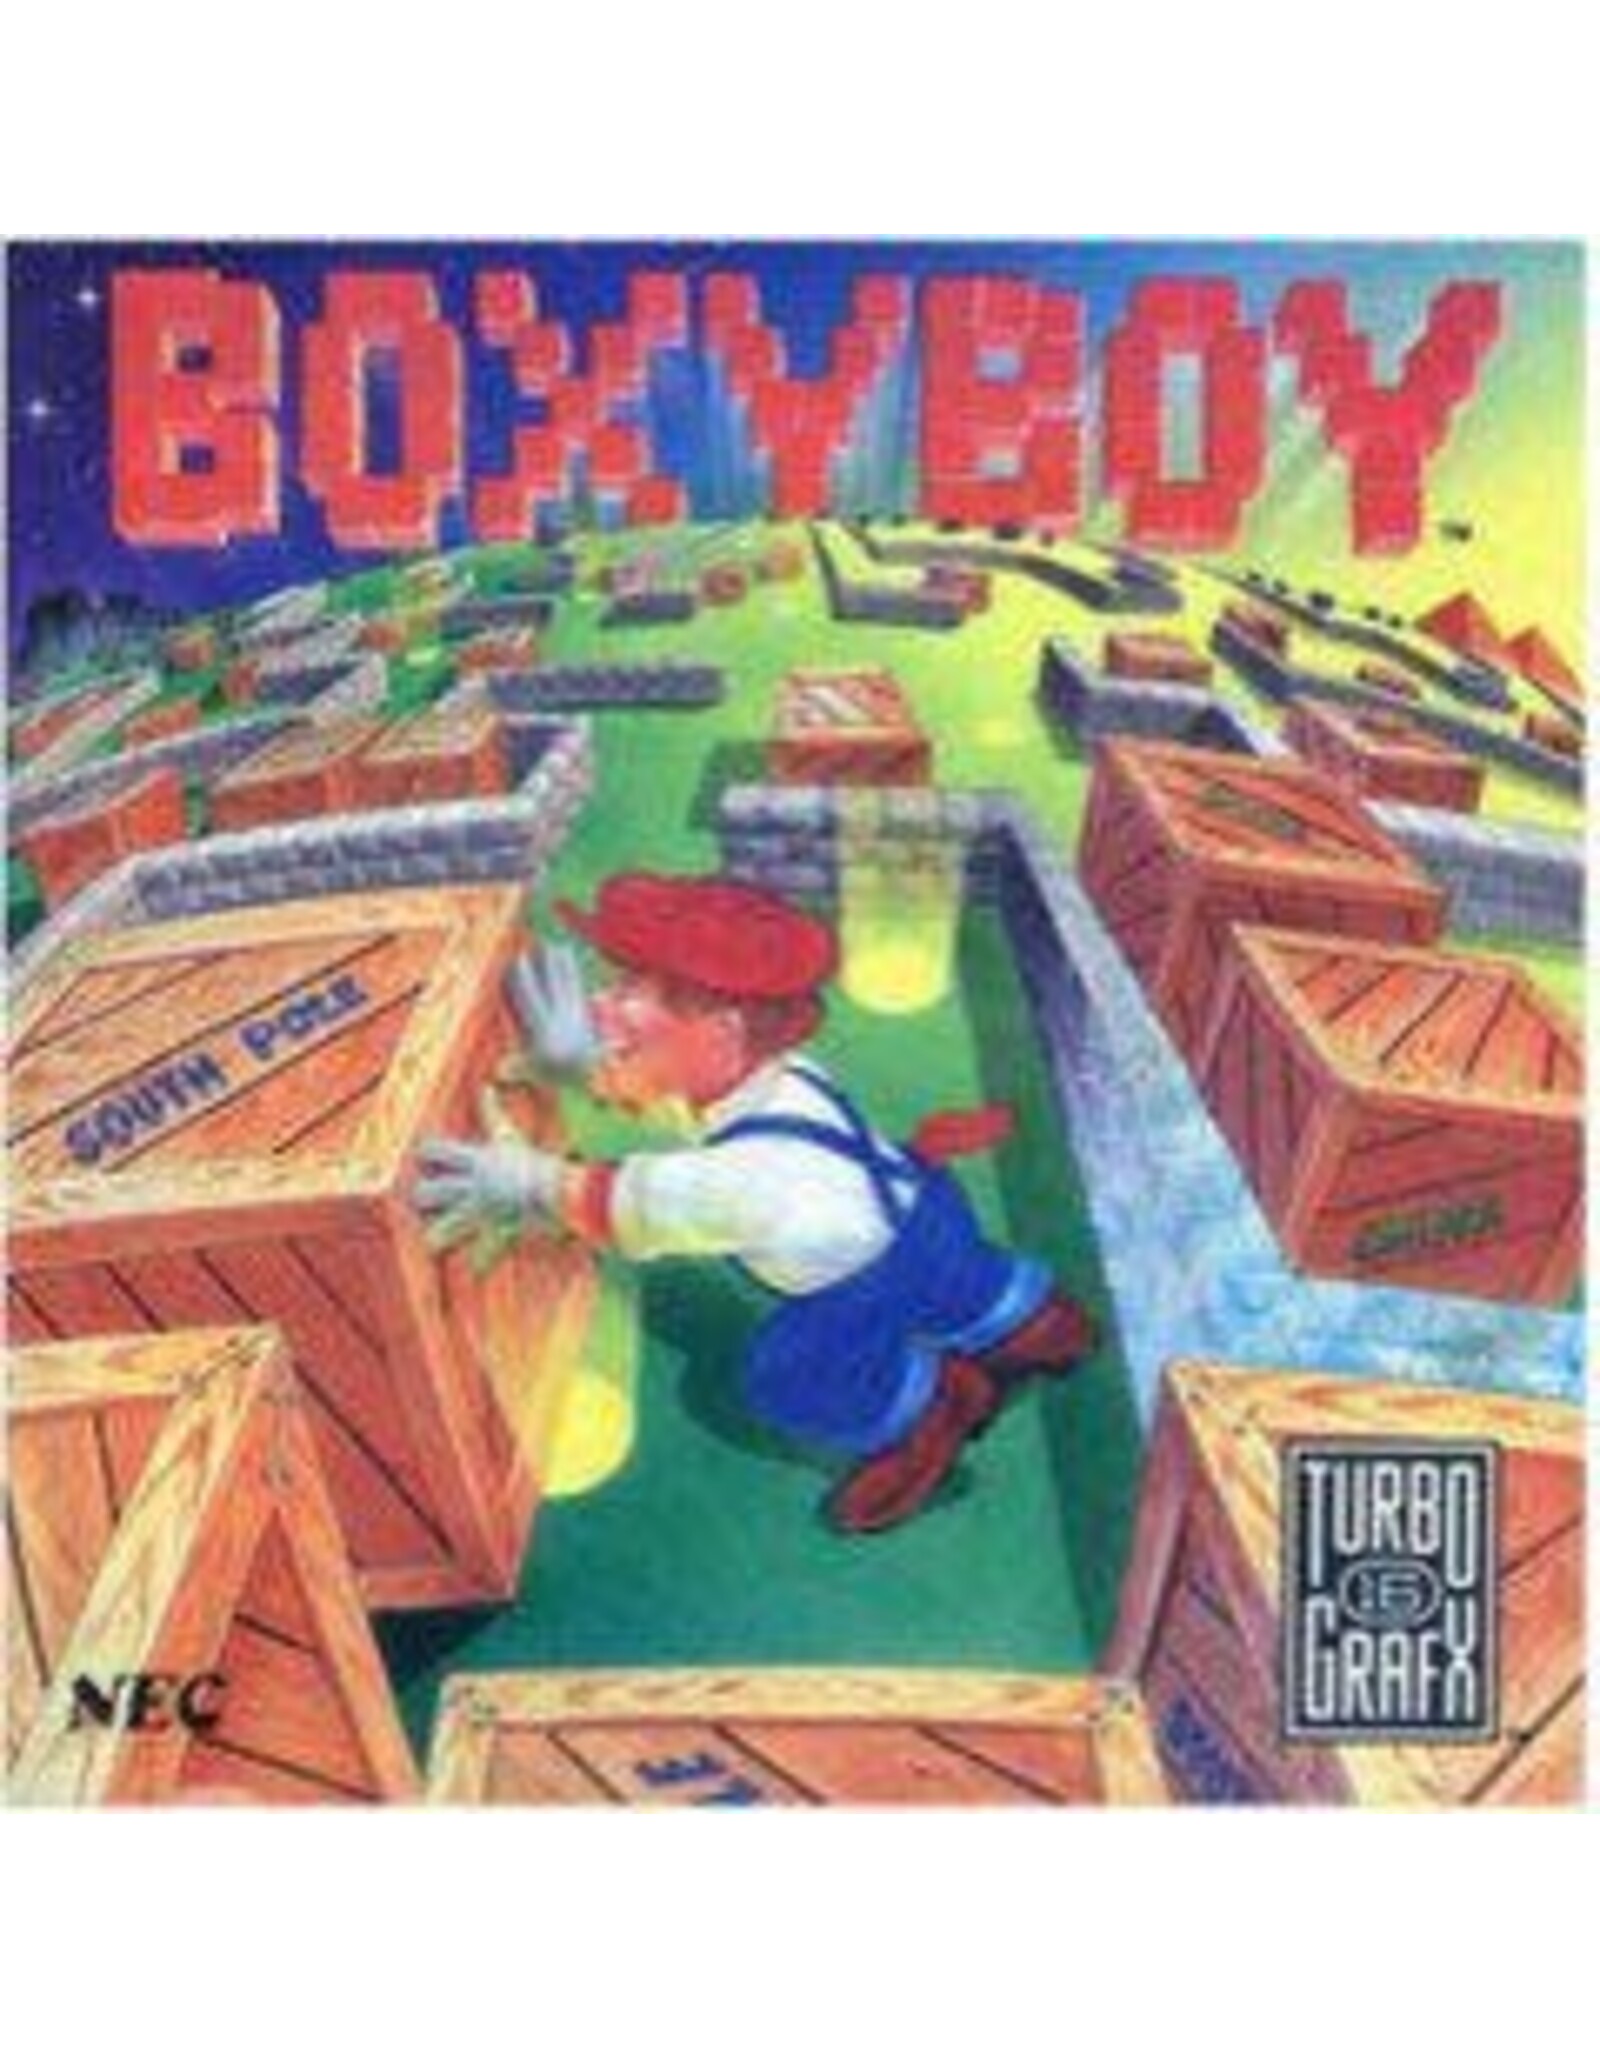 Turbografx 16 Boxyboy (Jewel Case, Game and Manual)